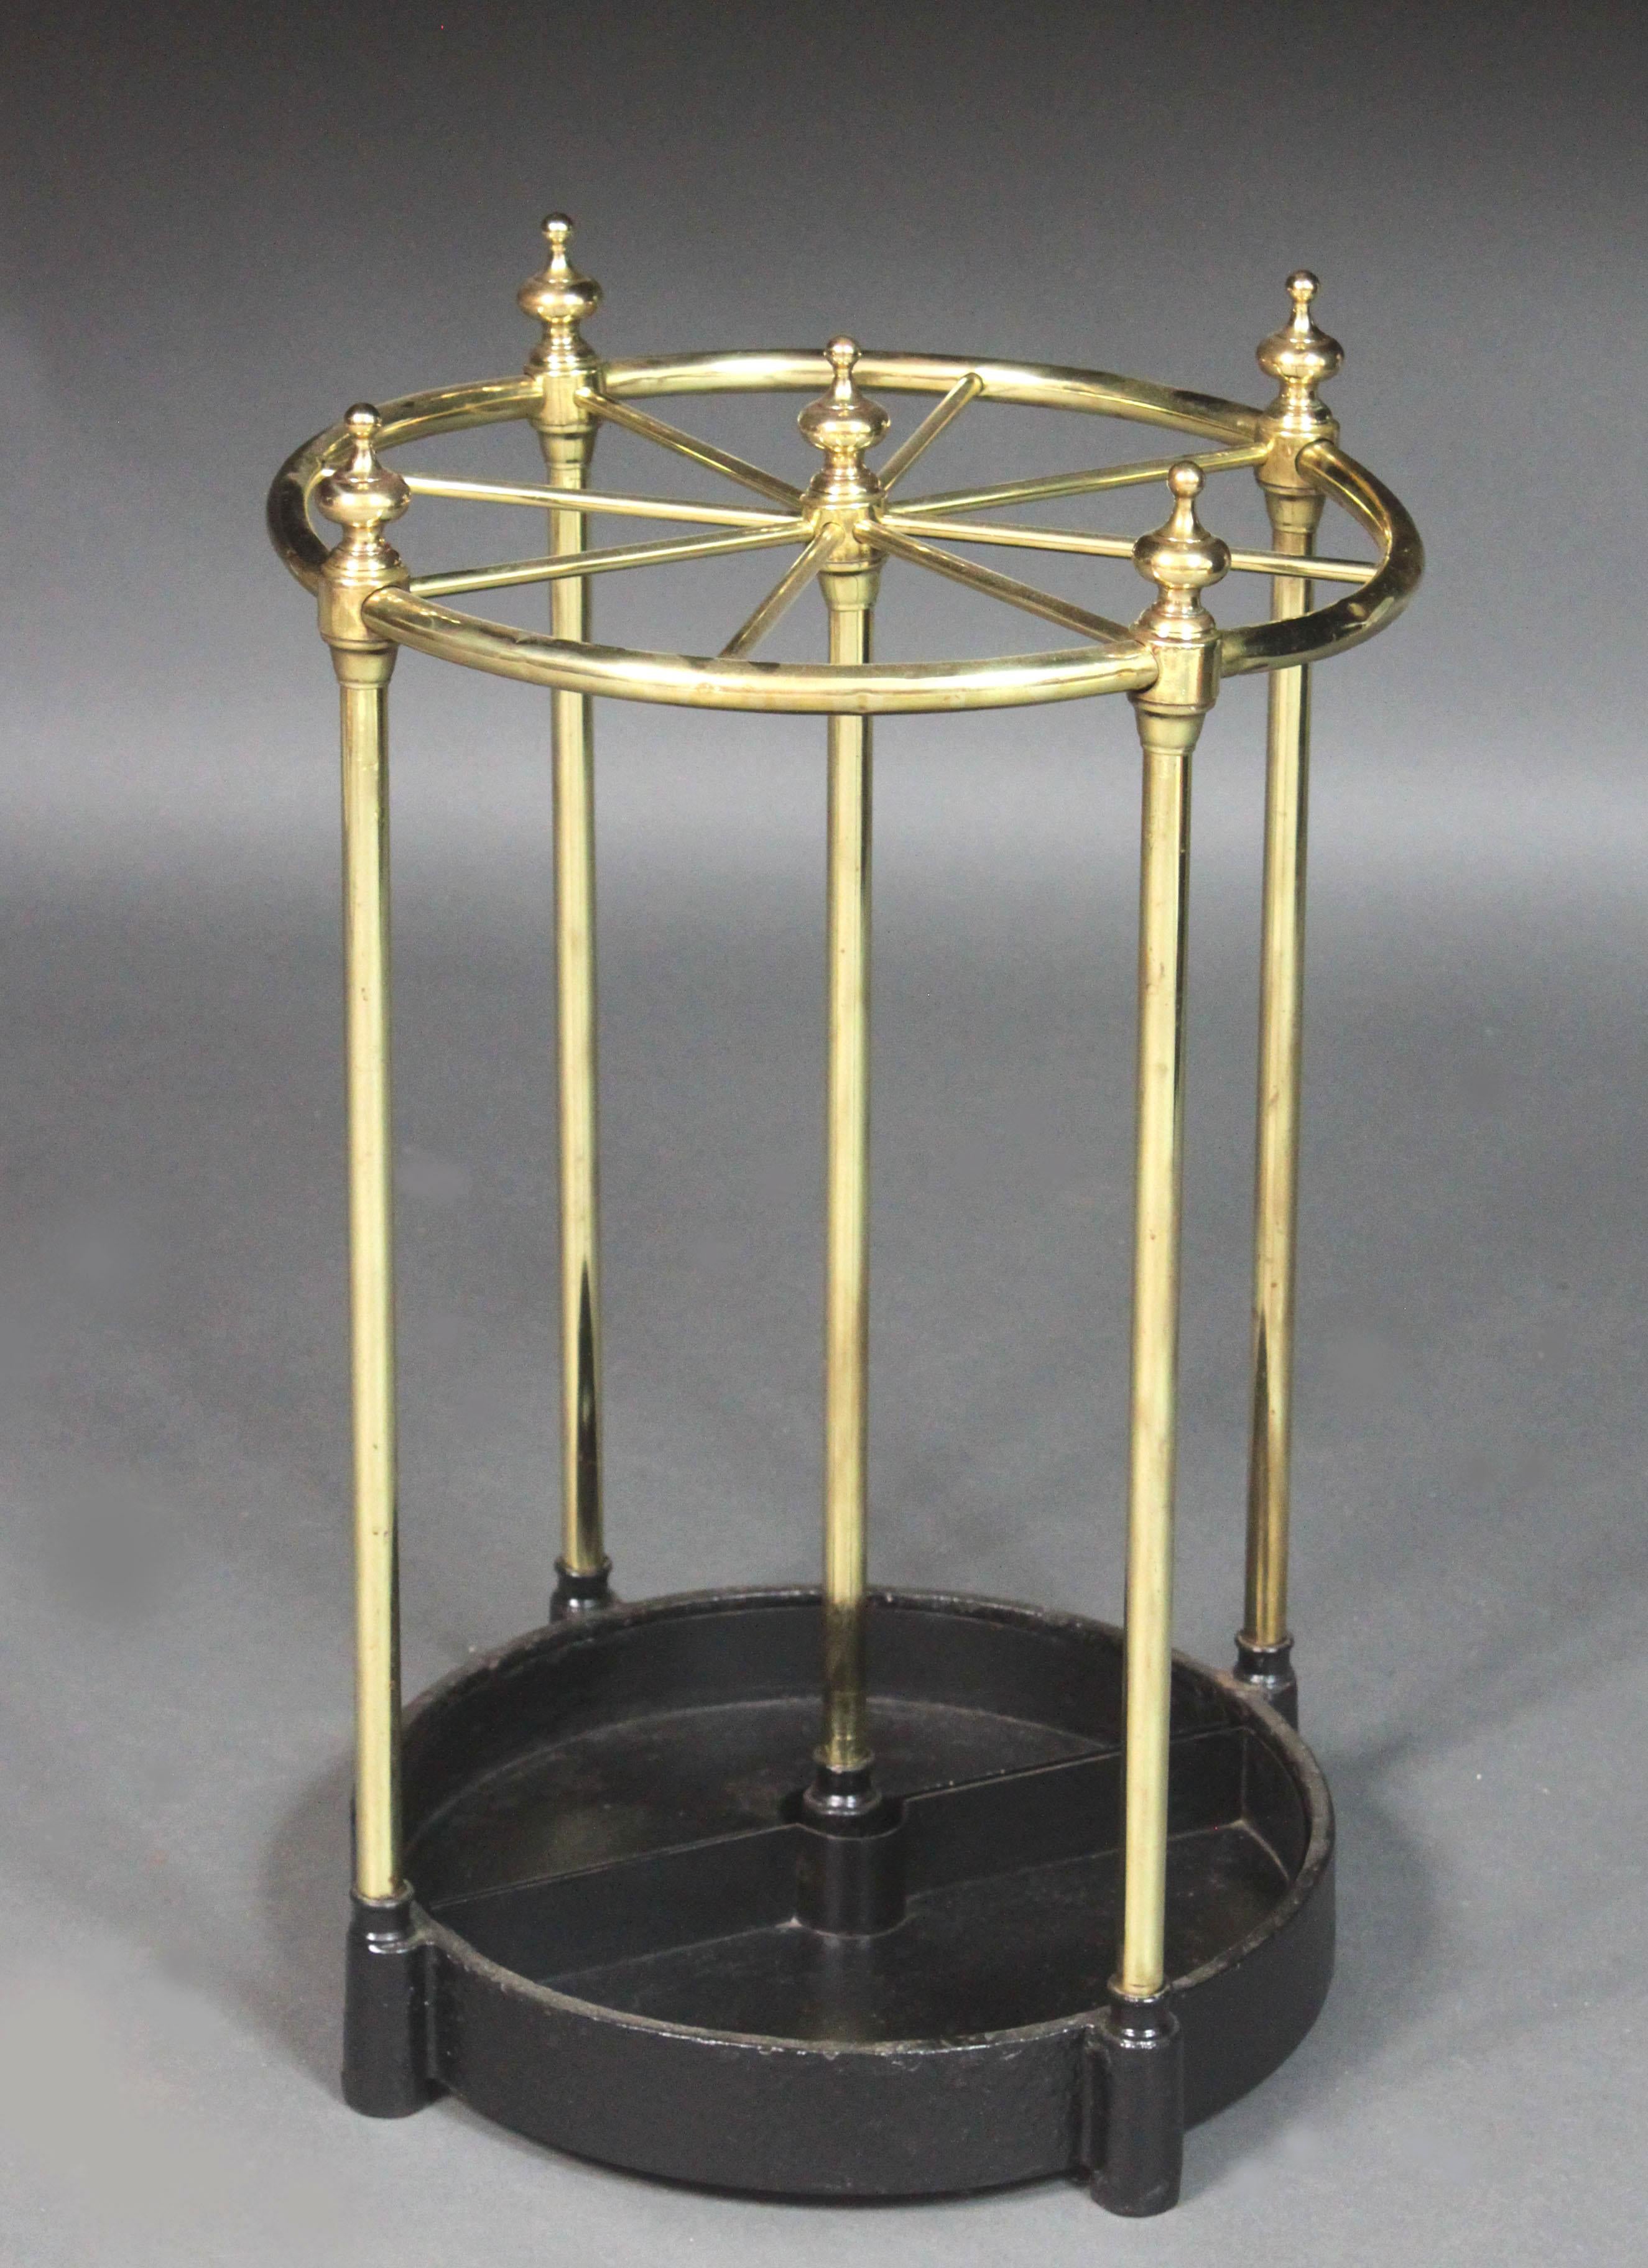 A good Victorian circular brass stick stand: made from brass rod with cast finials, cast iron base with removable drip trays